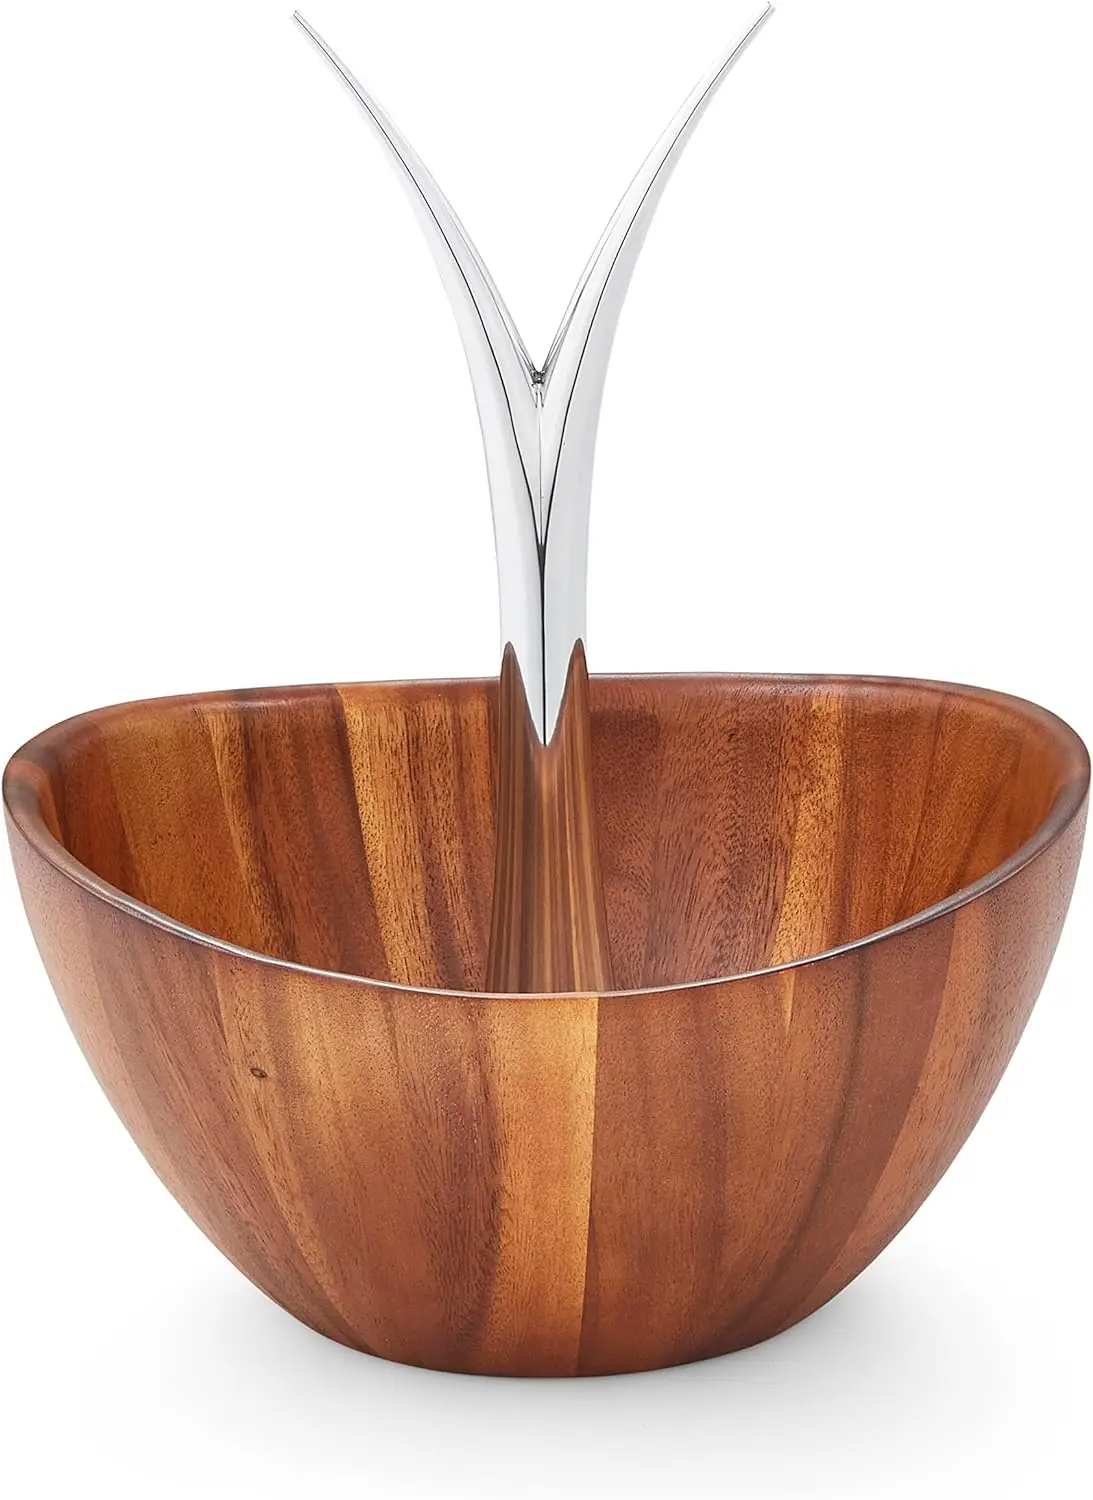 

Tree Bowl | Fruit Basket with Banana Hanger | Large Decorative Wooden Fruit Bowl for Kitchen Counter or Centerpiece Table Décor